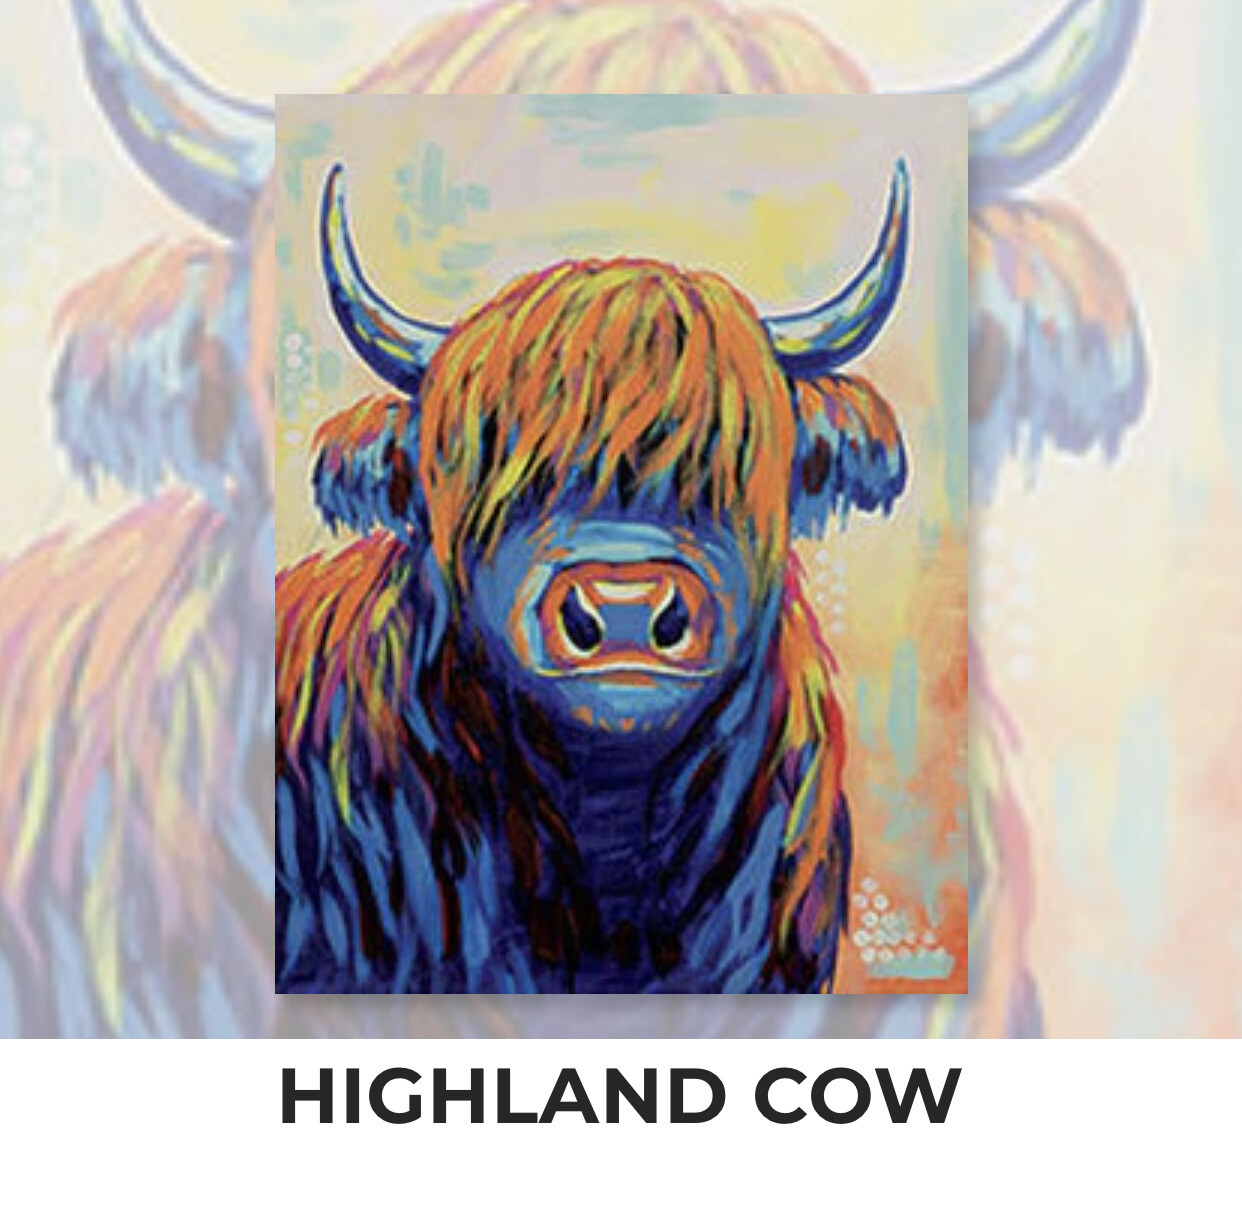 Highland Cow ADULT Acrylic Paint On Canvas DIY Art Kit - 3 Week Special Order